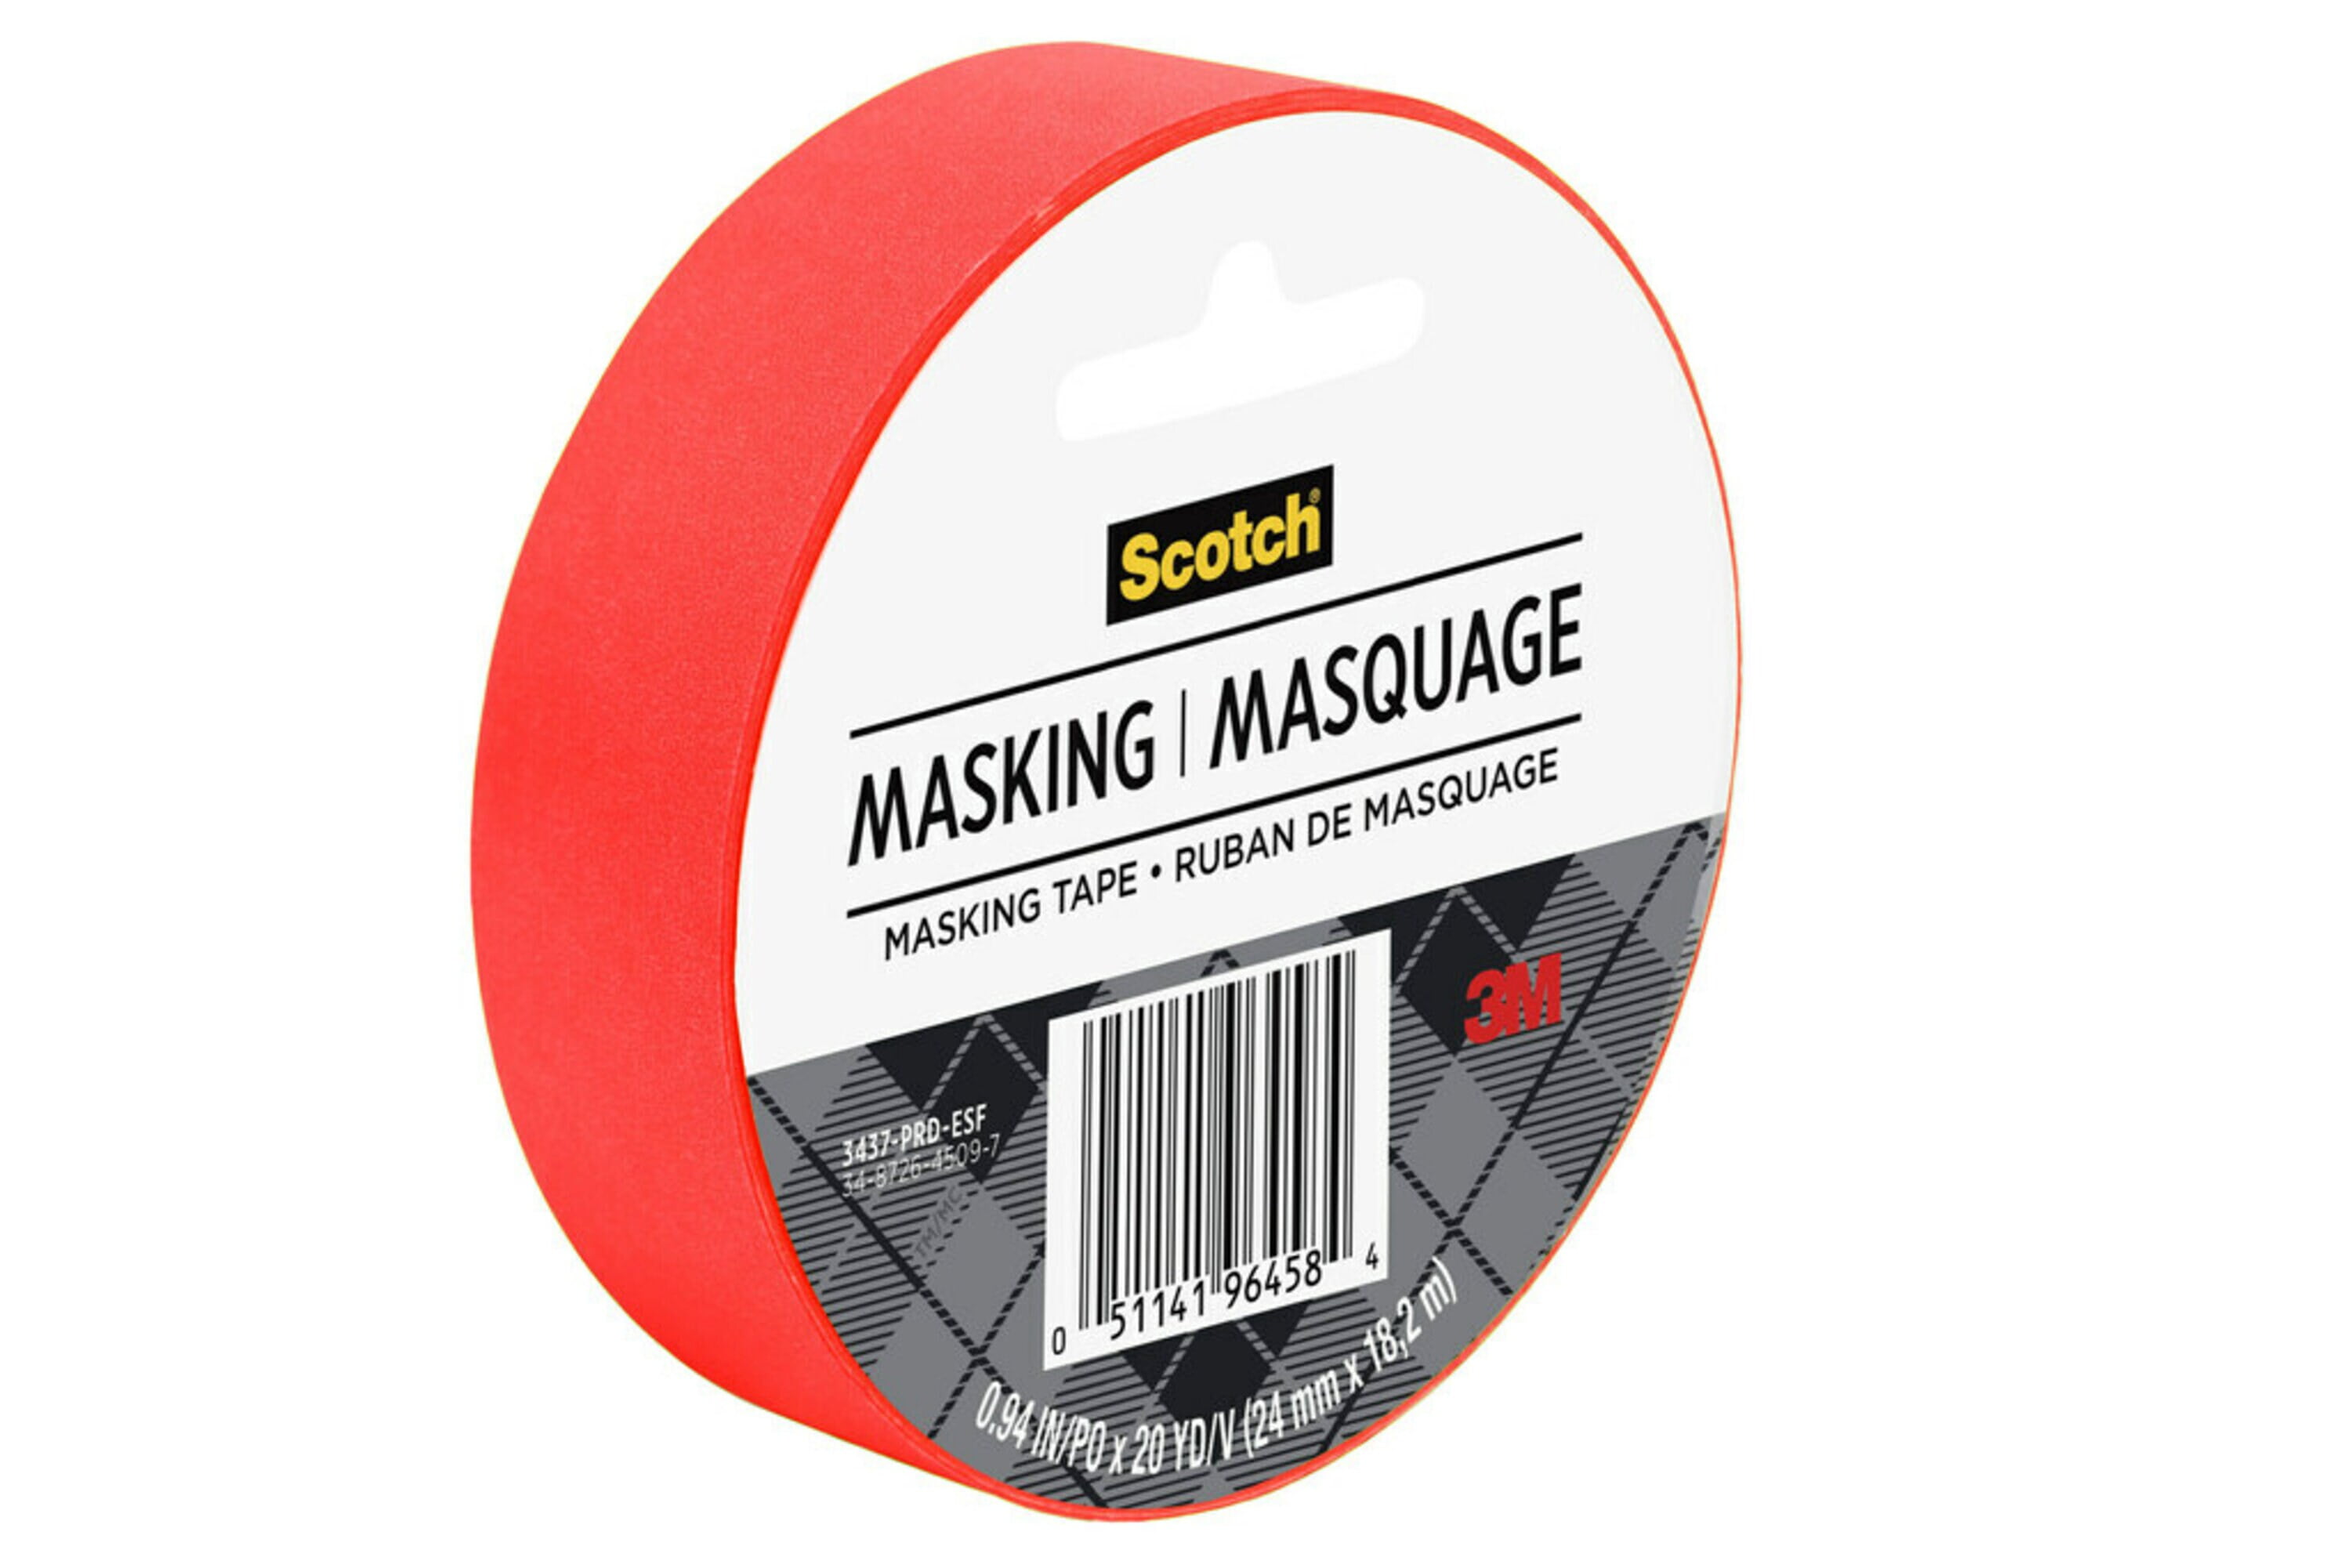 Scotch Expressions Masking Tape, .94 x 20yds, Primary Red